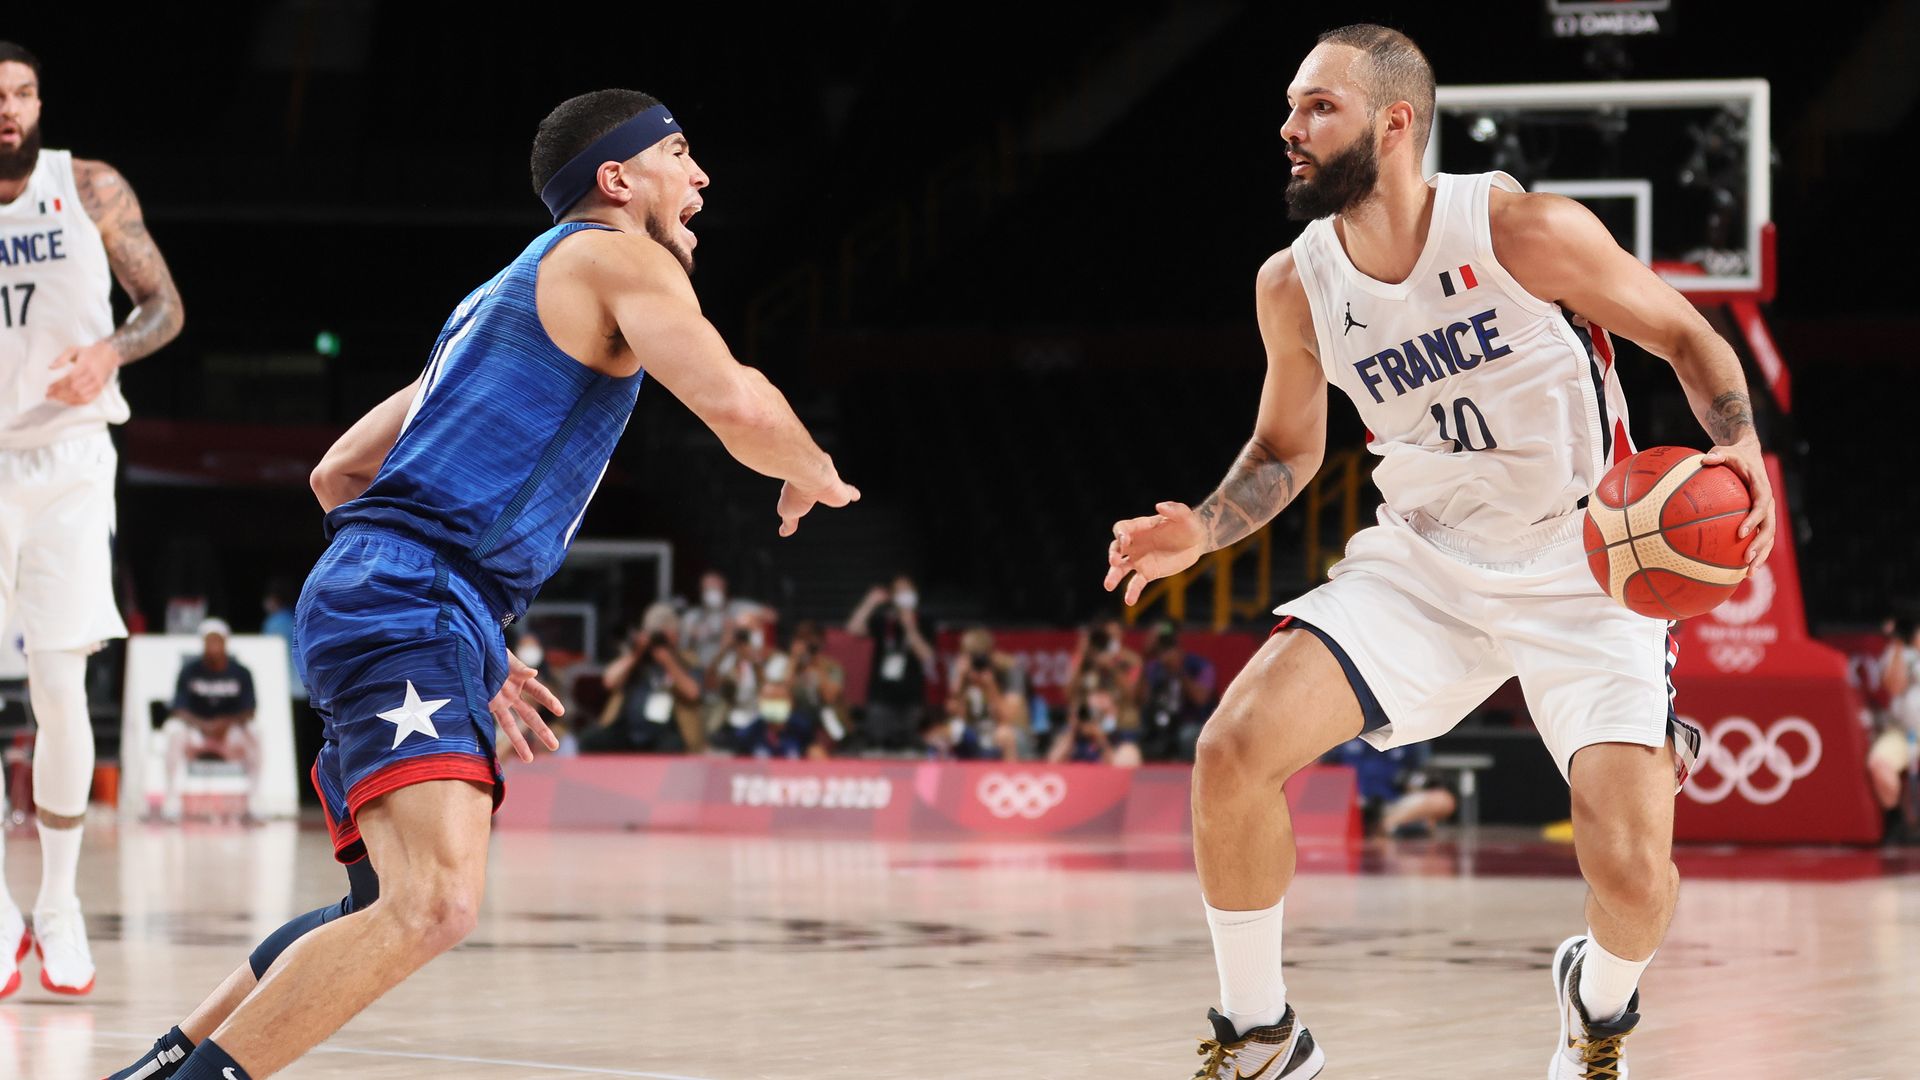 Evan Fournier #10 of Team France looks to drive past Devin Booker #15 of Team United States 